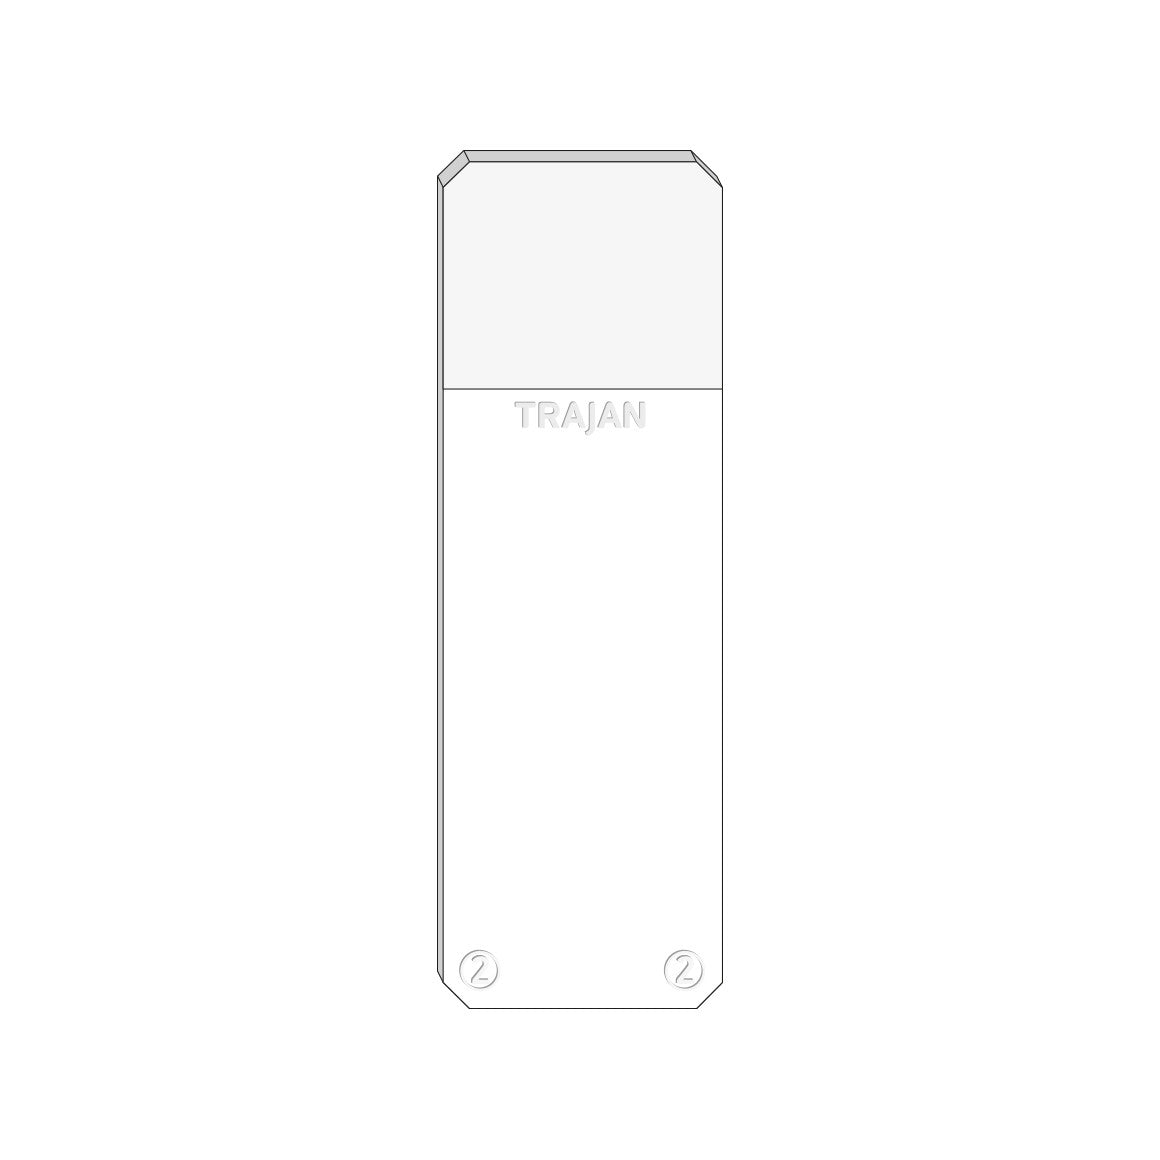 Trajan Scientific and Medical, Series 2 Adhesive Microscope Slides, White, Frost 20 mm, 76 mm x 26 mm